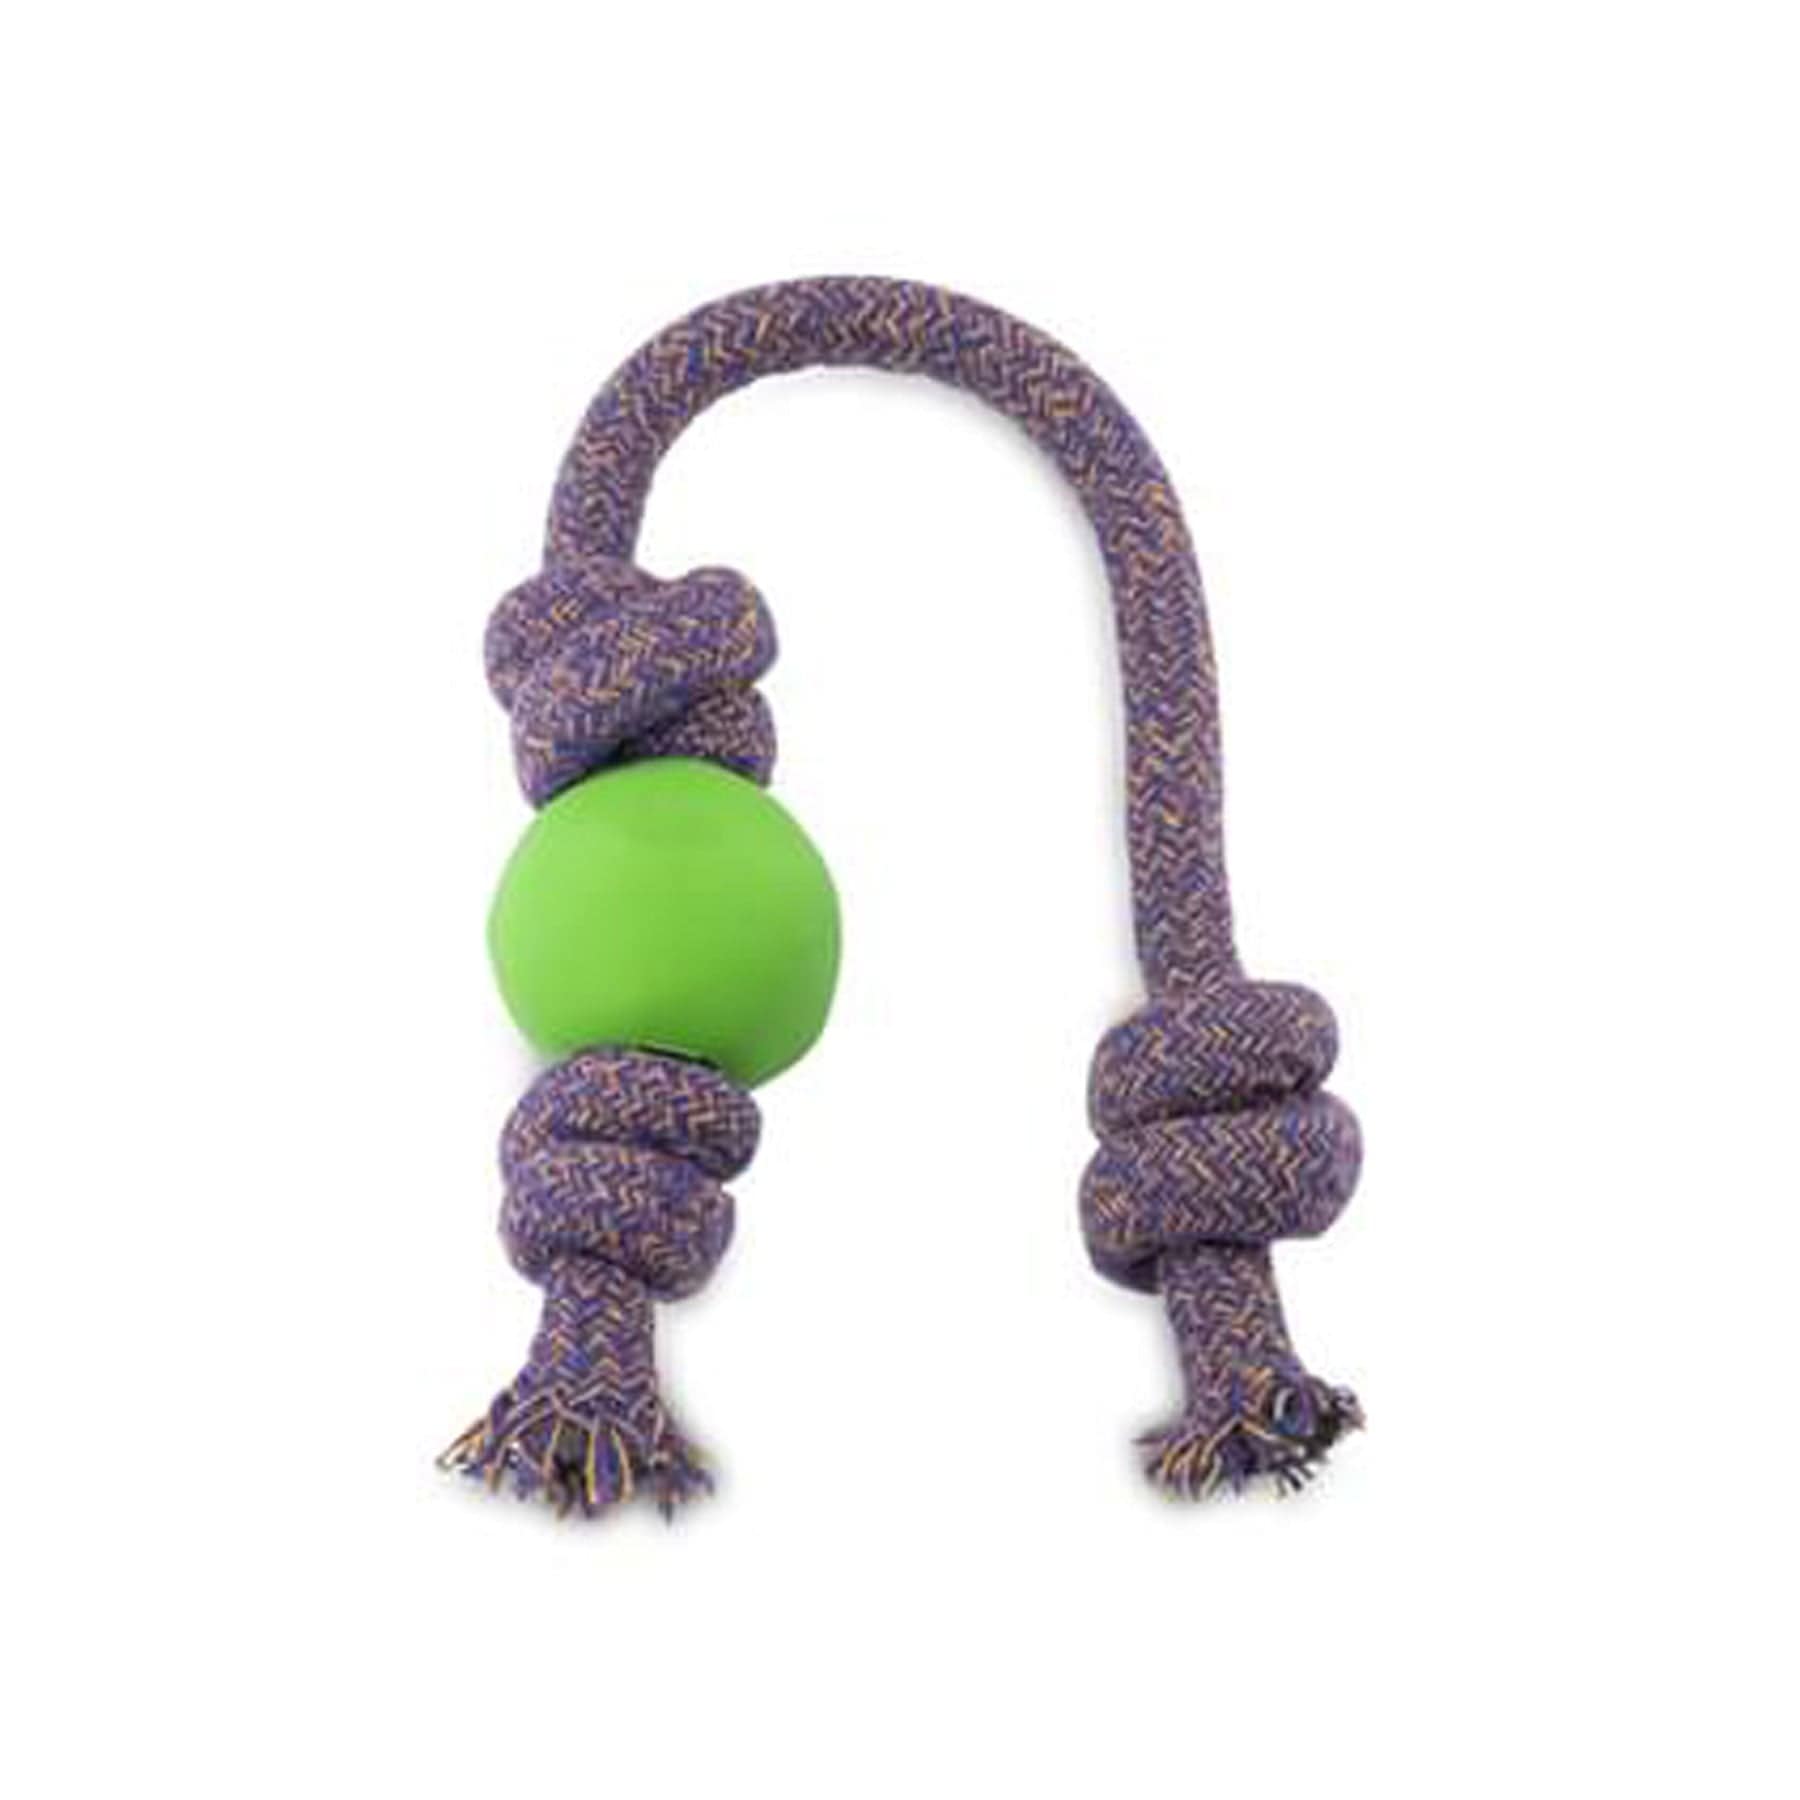 Beco natural rubber ball on rope large green